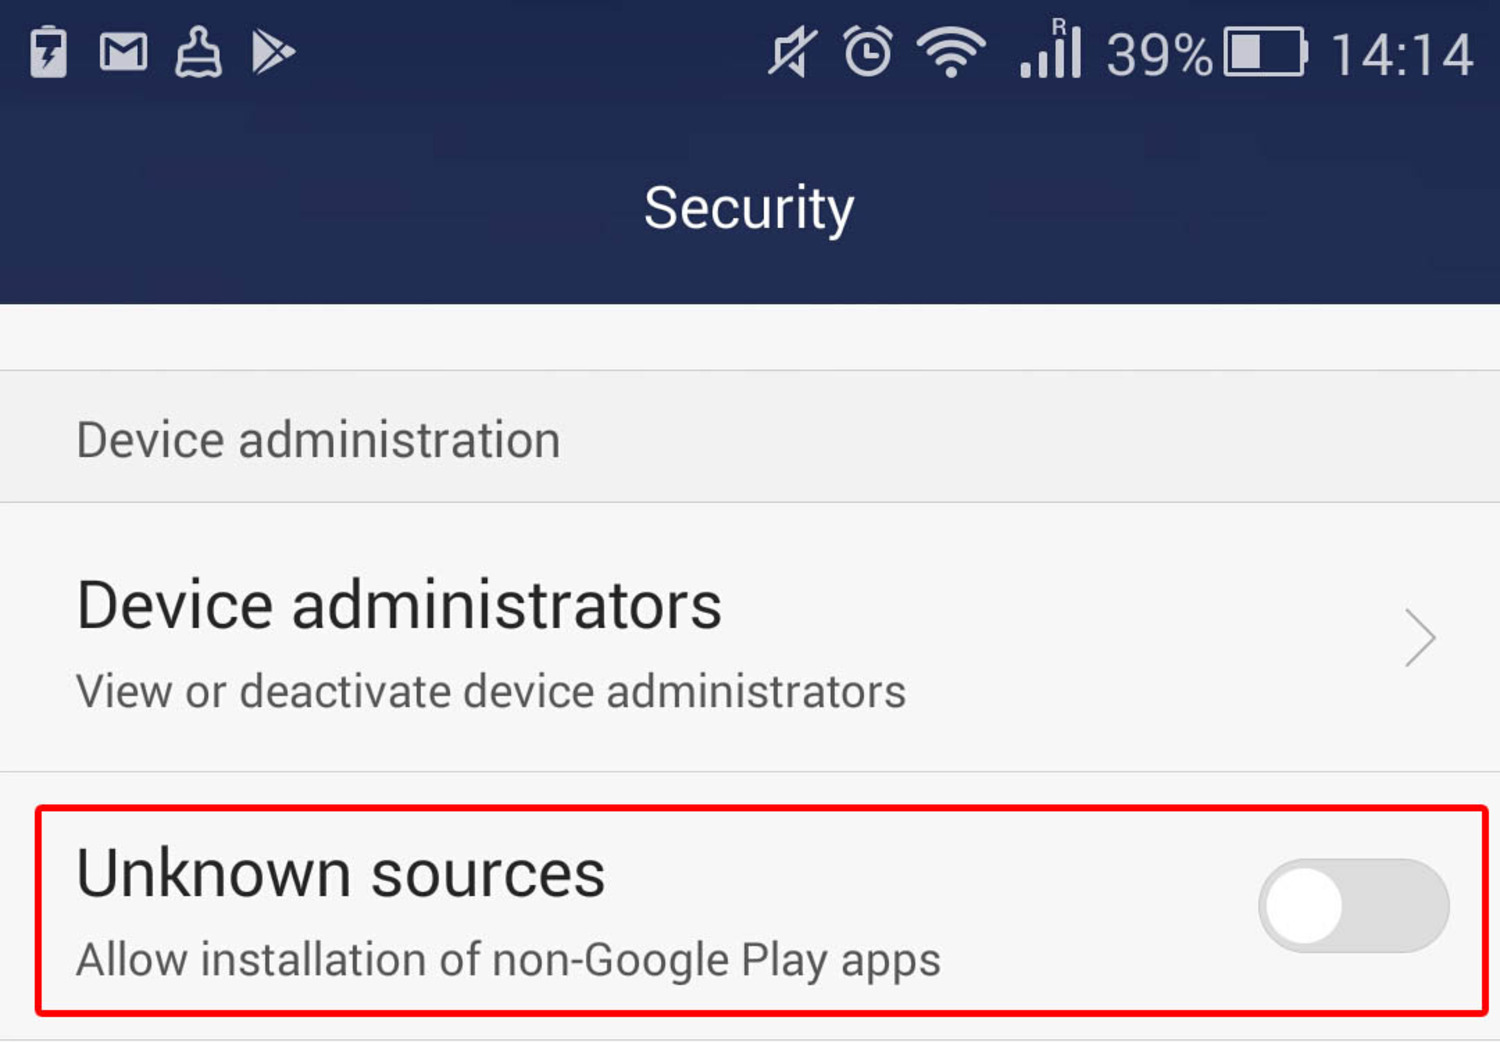 turn off unknown sources after installation for security